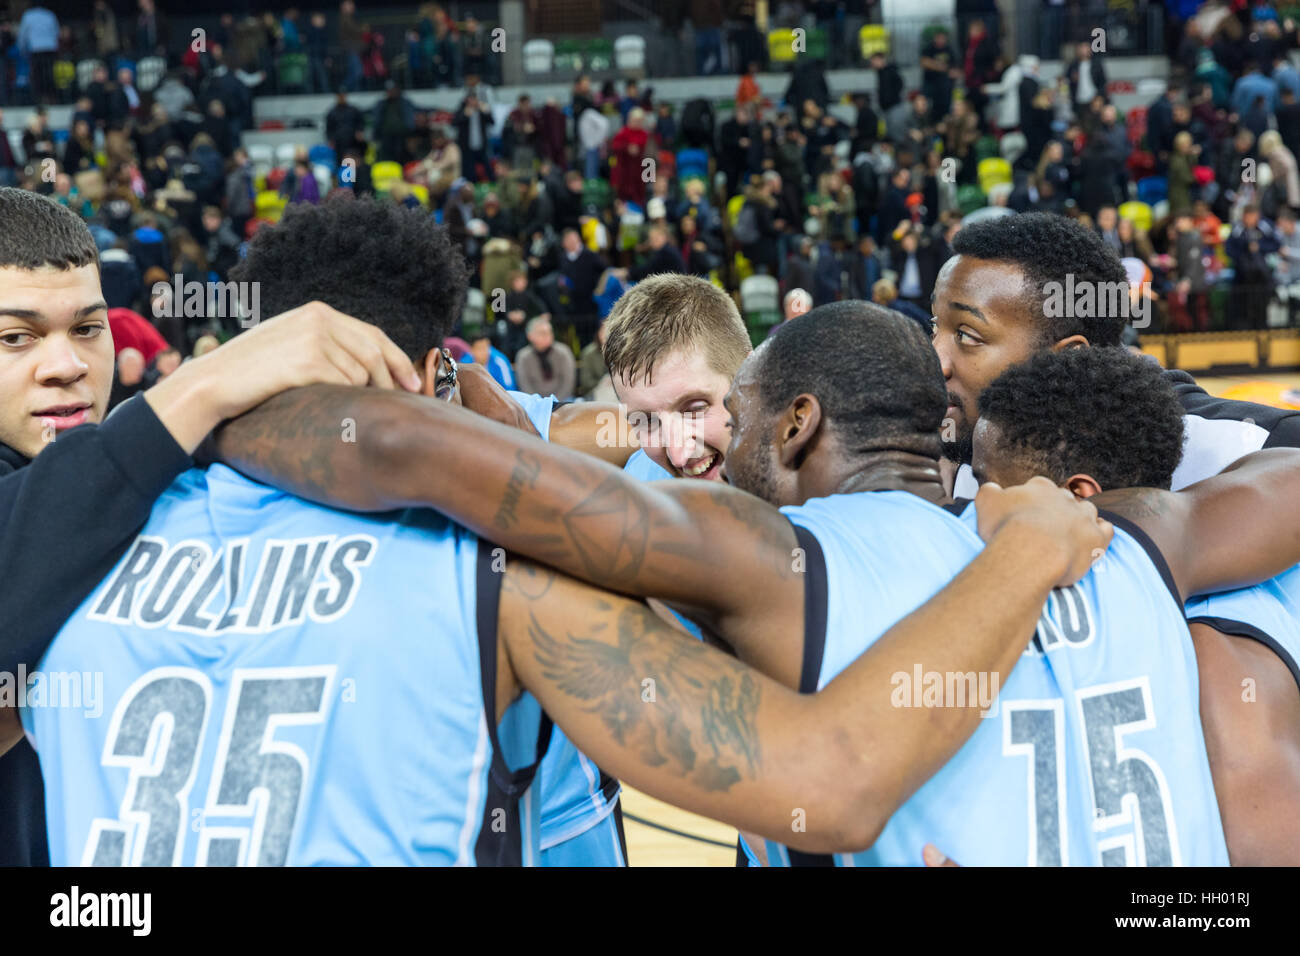 London, UK. 14th January, 2017. Surrey players celebrate their win. Tensions run high in the BBL Trophy basketball game between home team London Lions and visitors Surrey Scorchers as both teams try to get to the next round of the Trophy. Scorchers pinch the game in the last 20 seconds and win 88-87 over the Lions. Credit: Imageplotter News and Sports/Alamy Live News Stock Photo